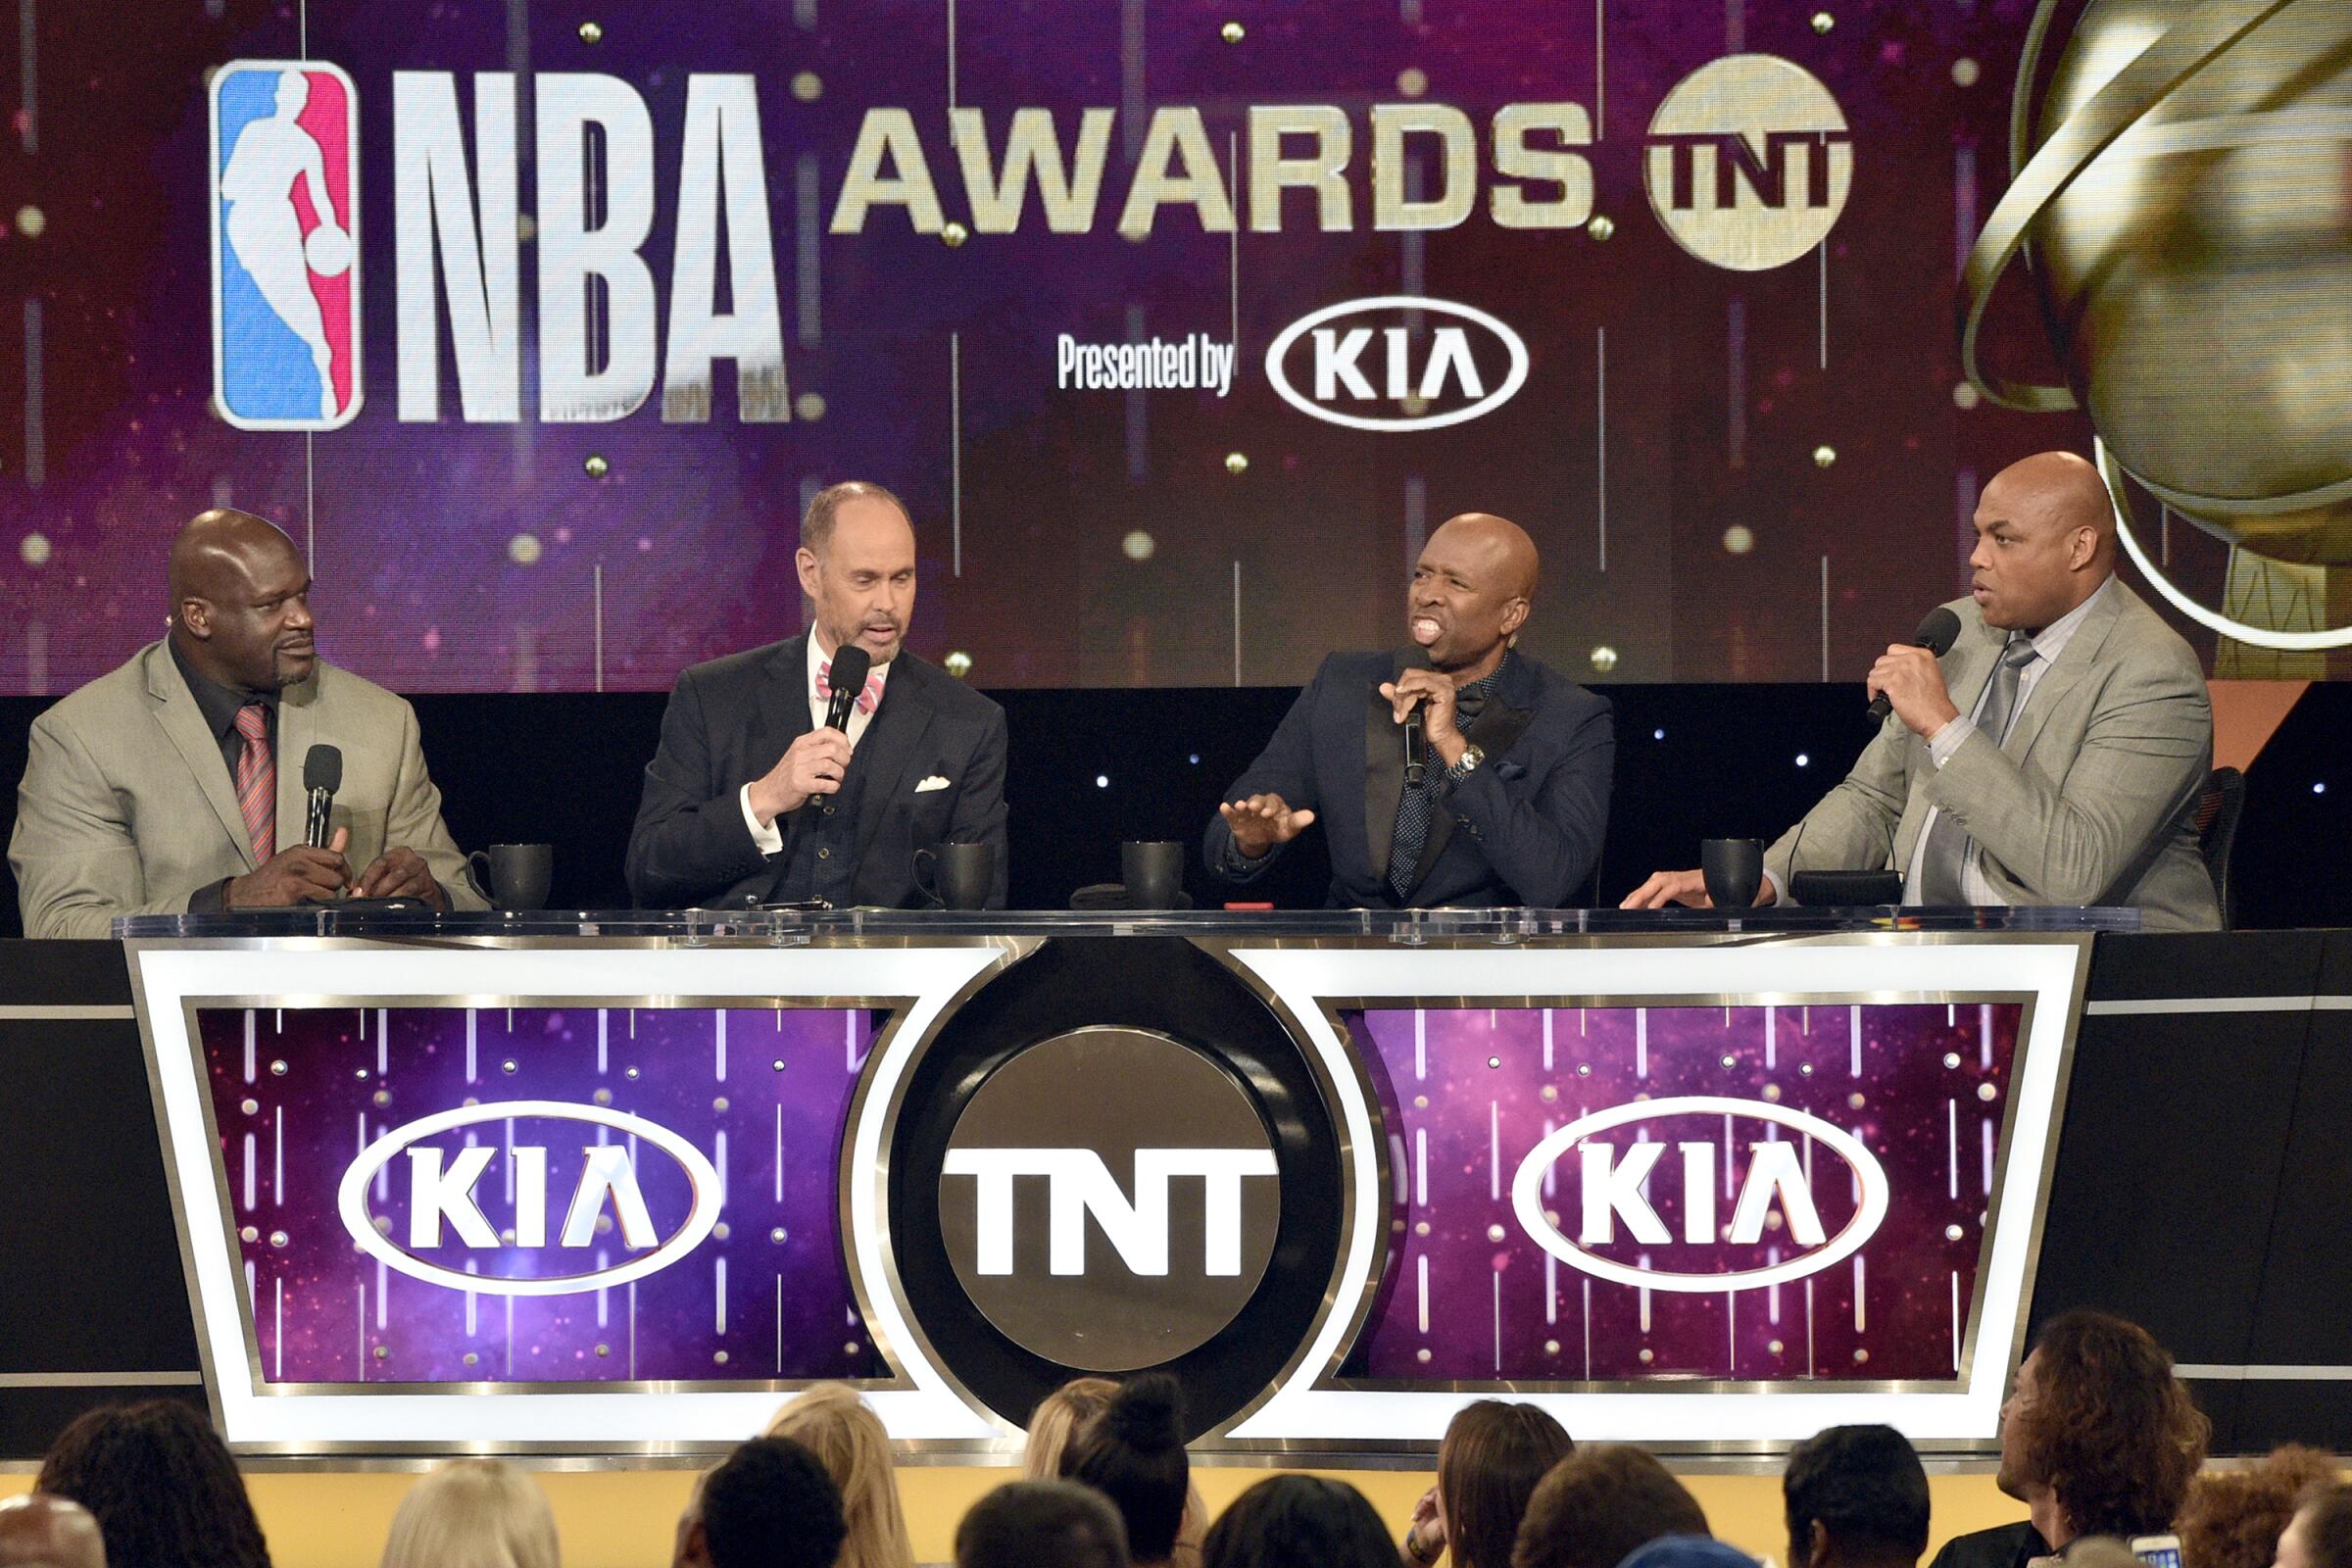 Shaquille O'Neal, from left, Ernie Johnson, Kenny Smith and Charles Barkley speak at the NBA Awards